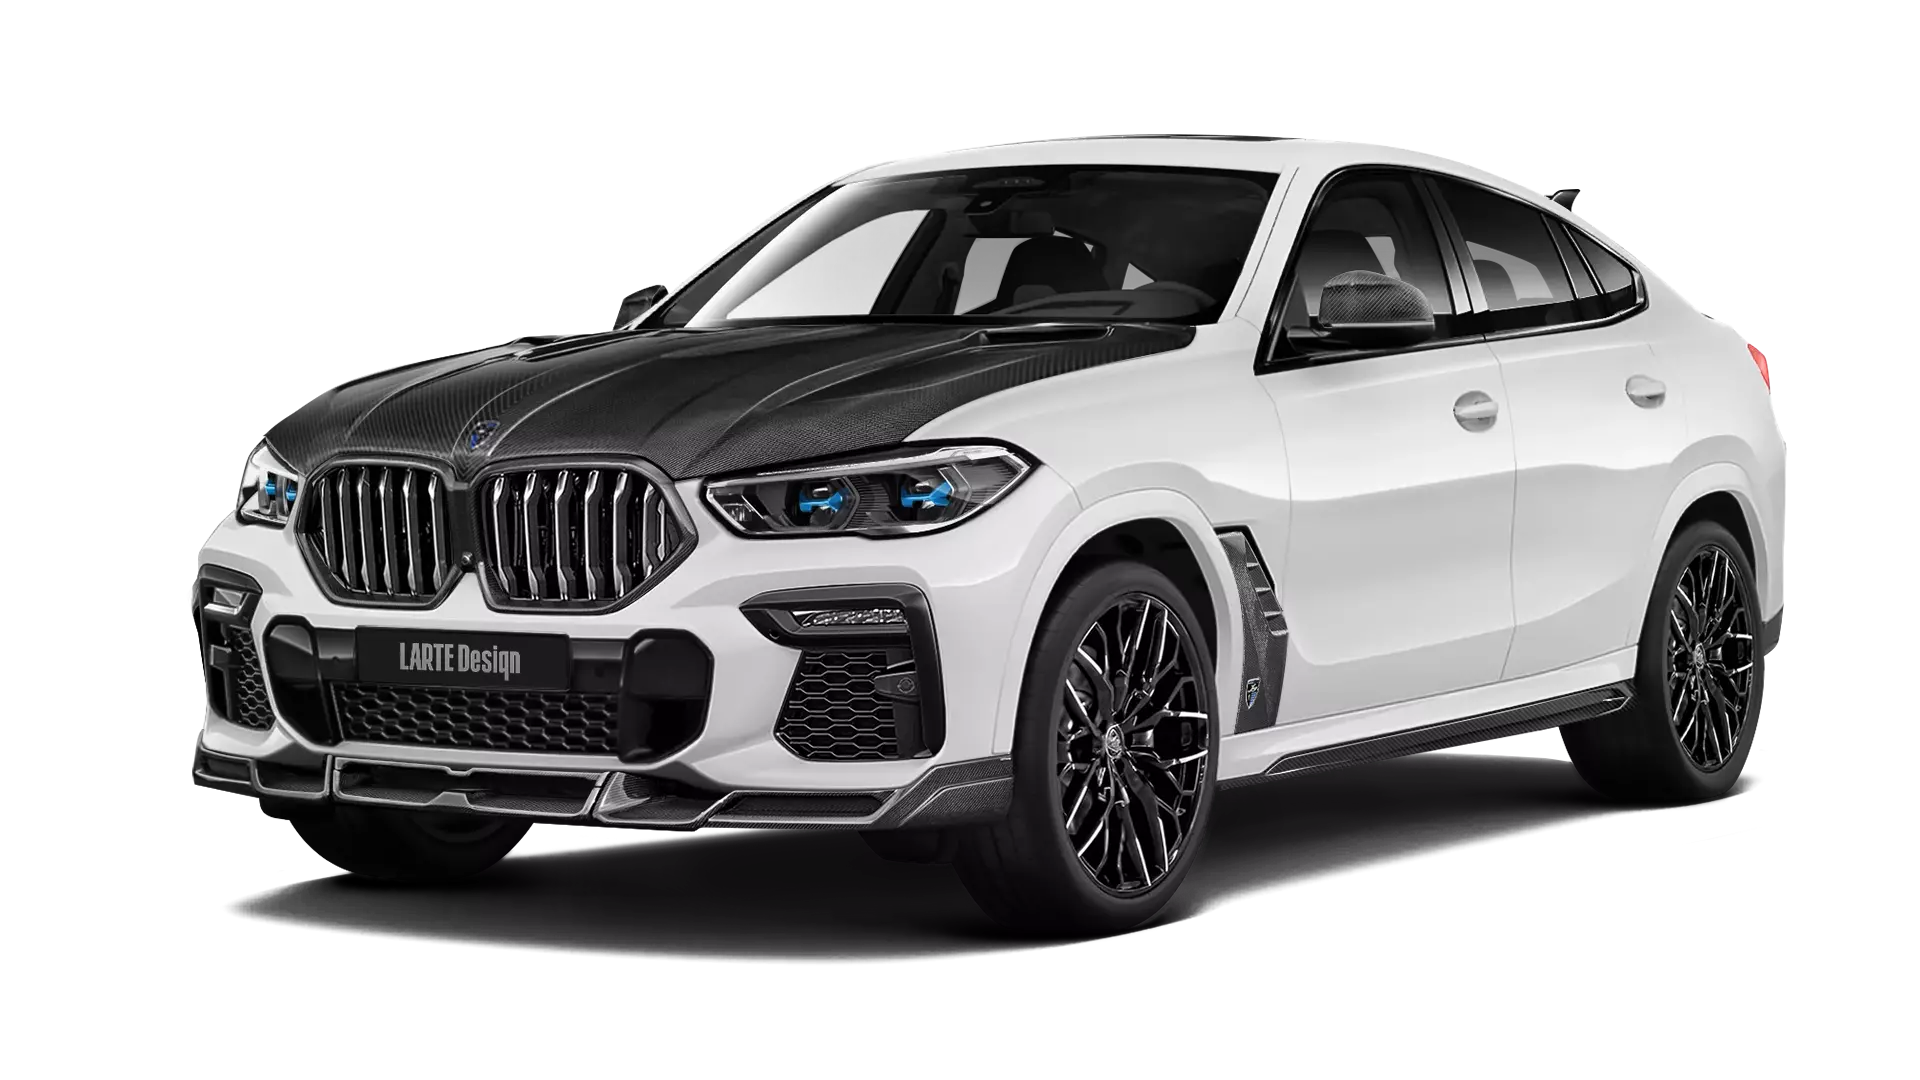 BMW X6 G06 with carbon body kit: front view shown in Snow White